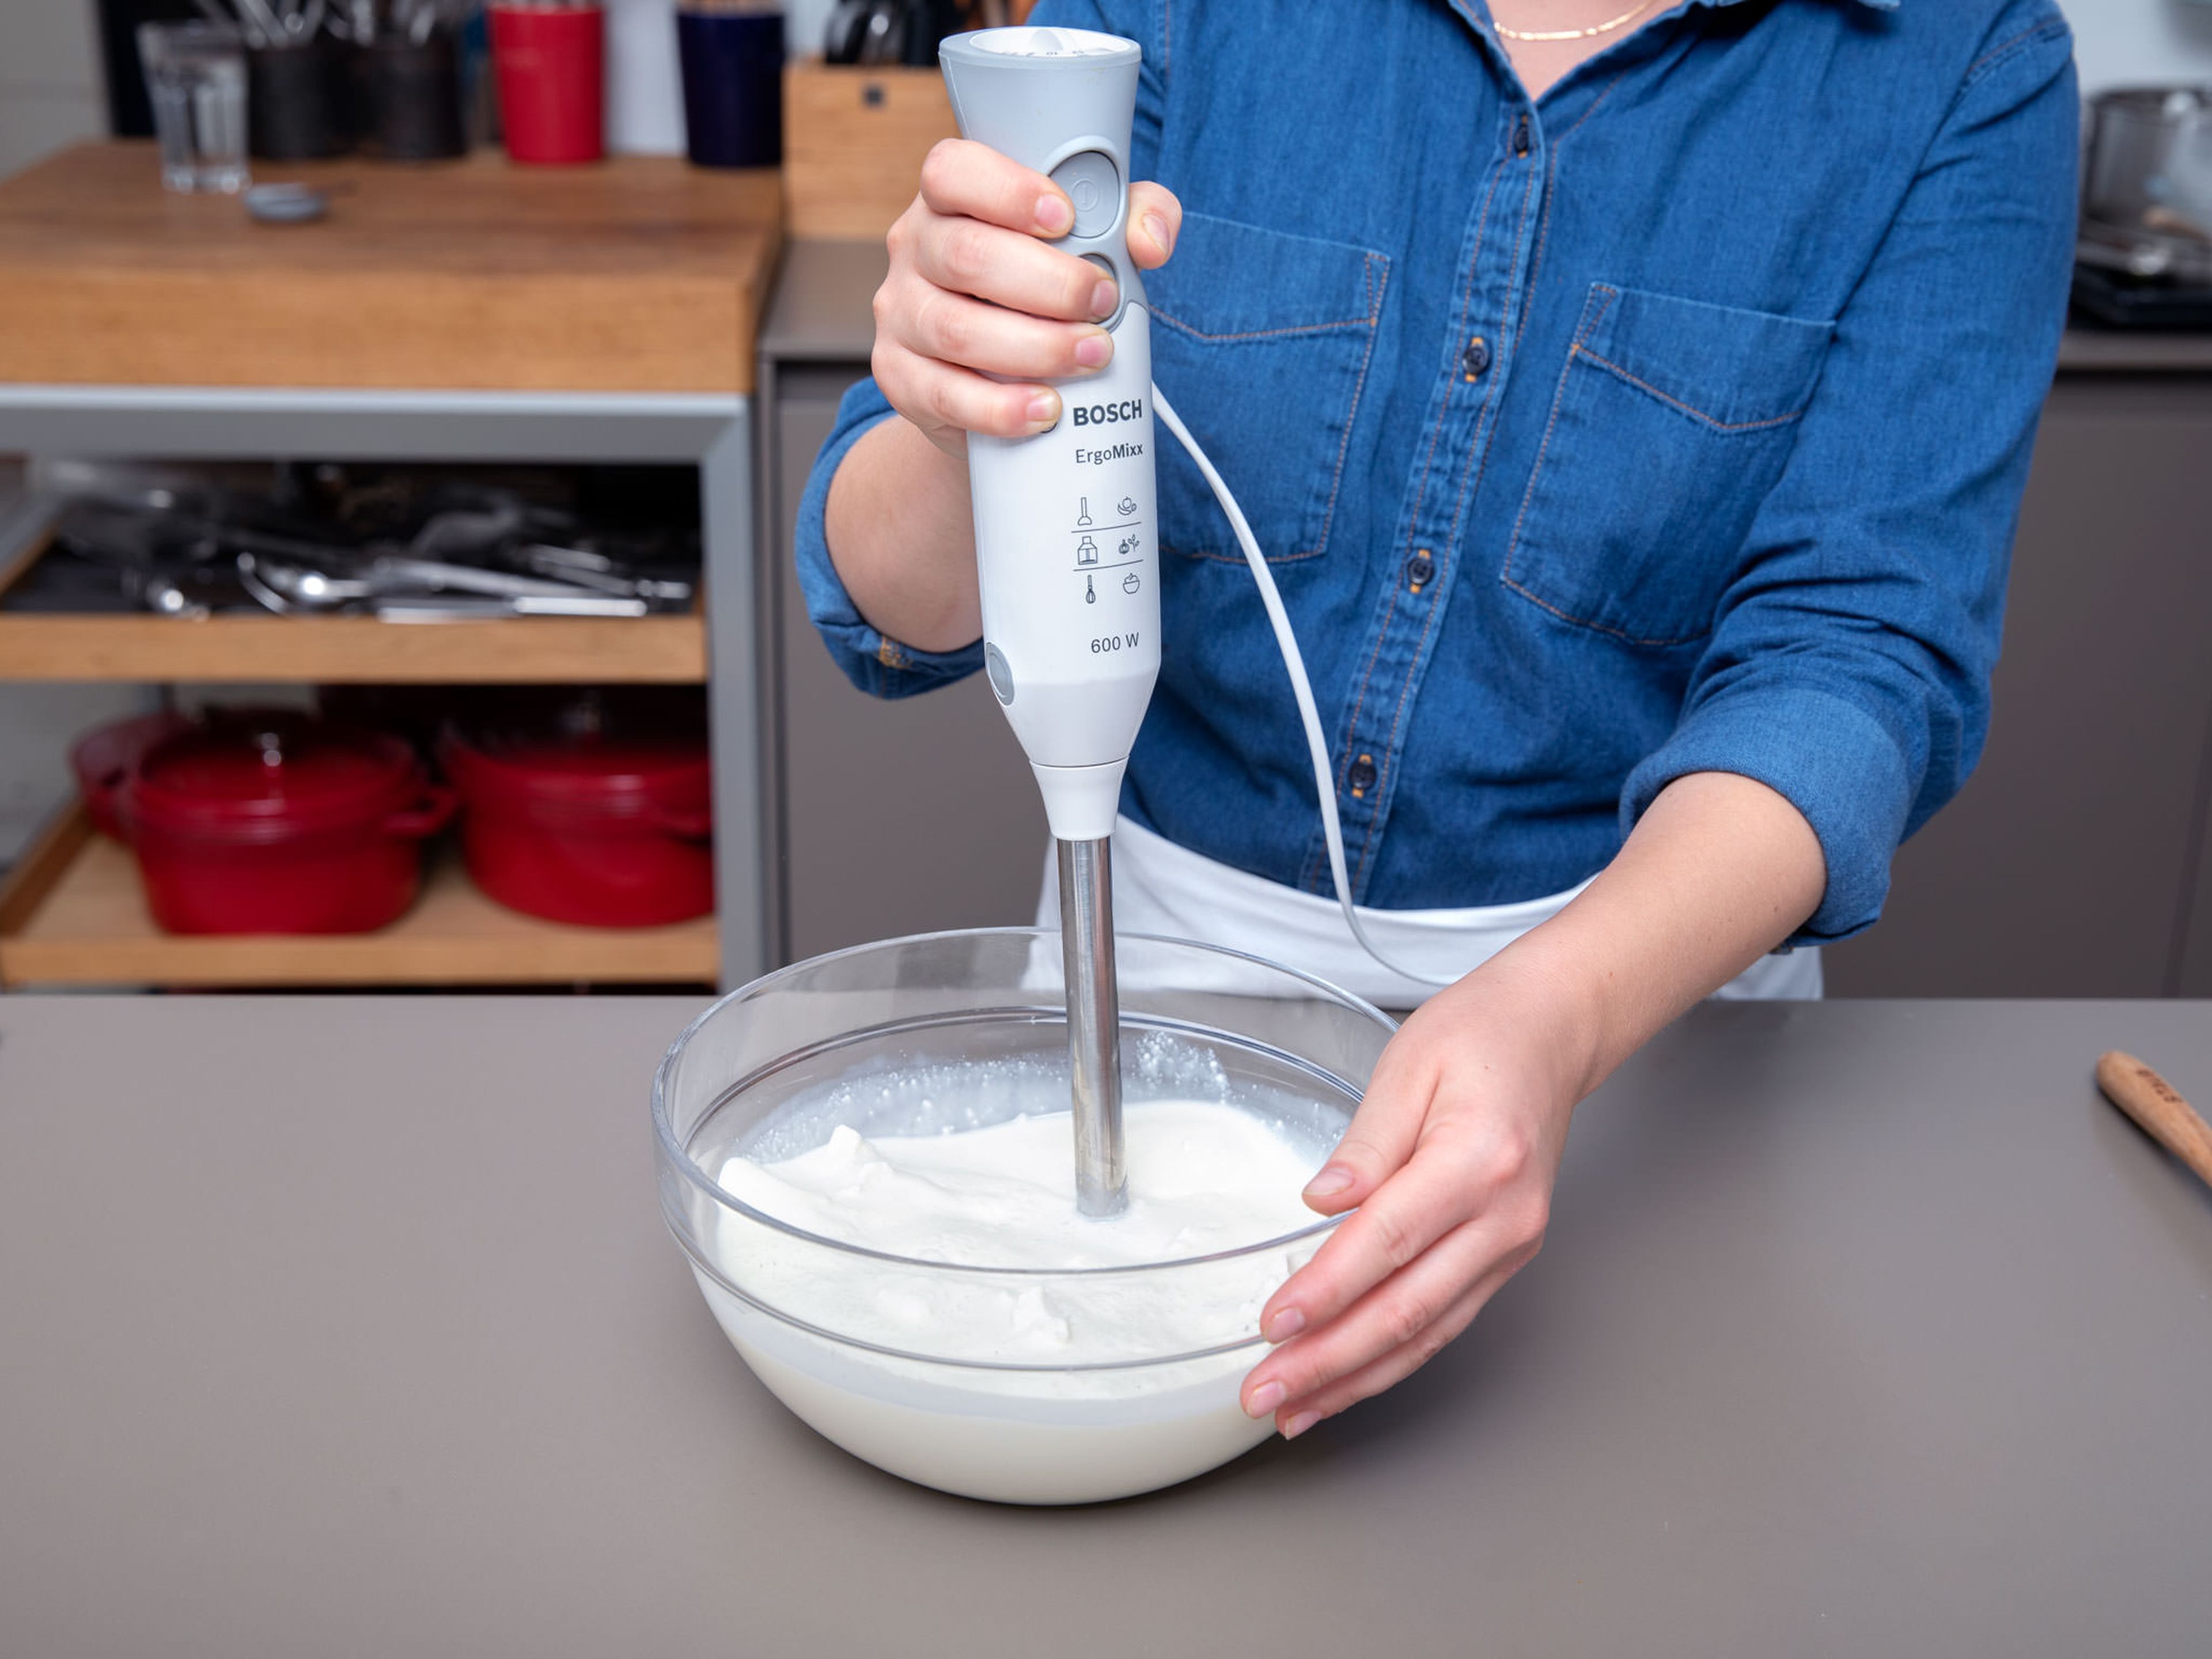 Add ricotta, sugar, milk, and heavy cream to a bowl and purée using an immersion blender until well combined. Juice and zest lemons, add to the bowl and stir well.